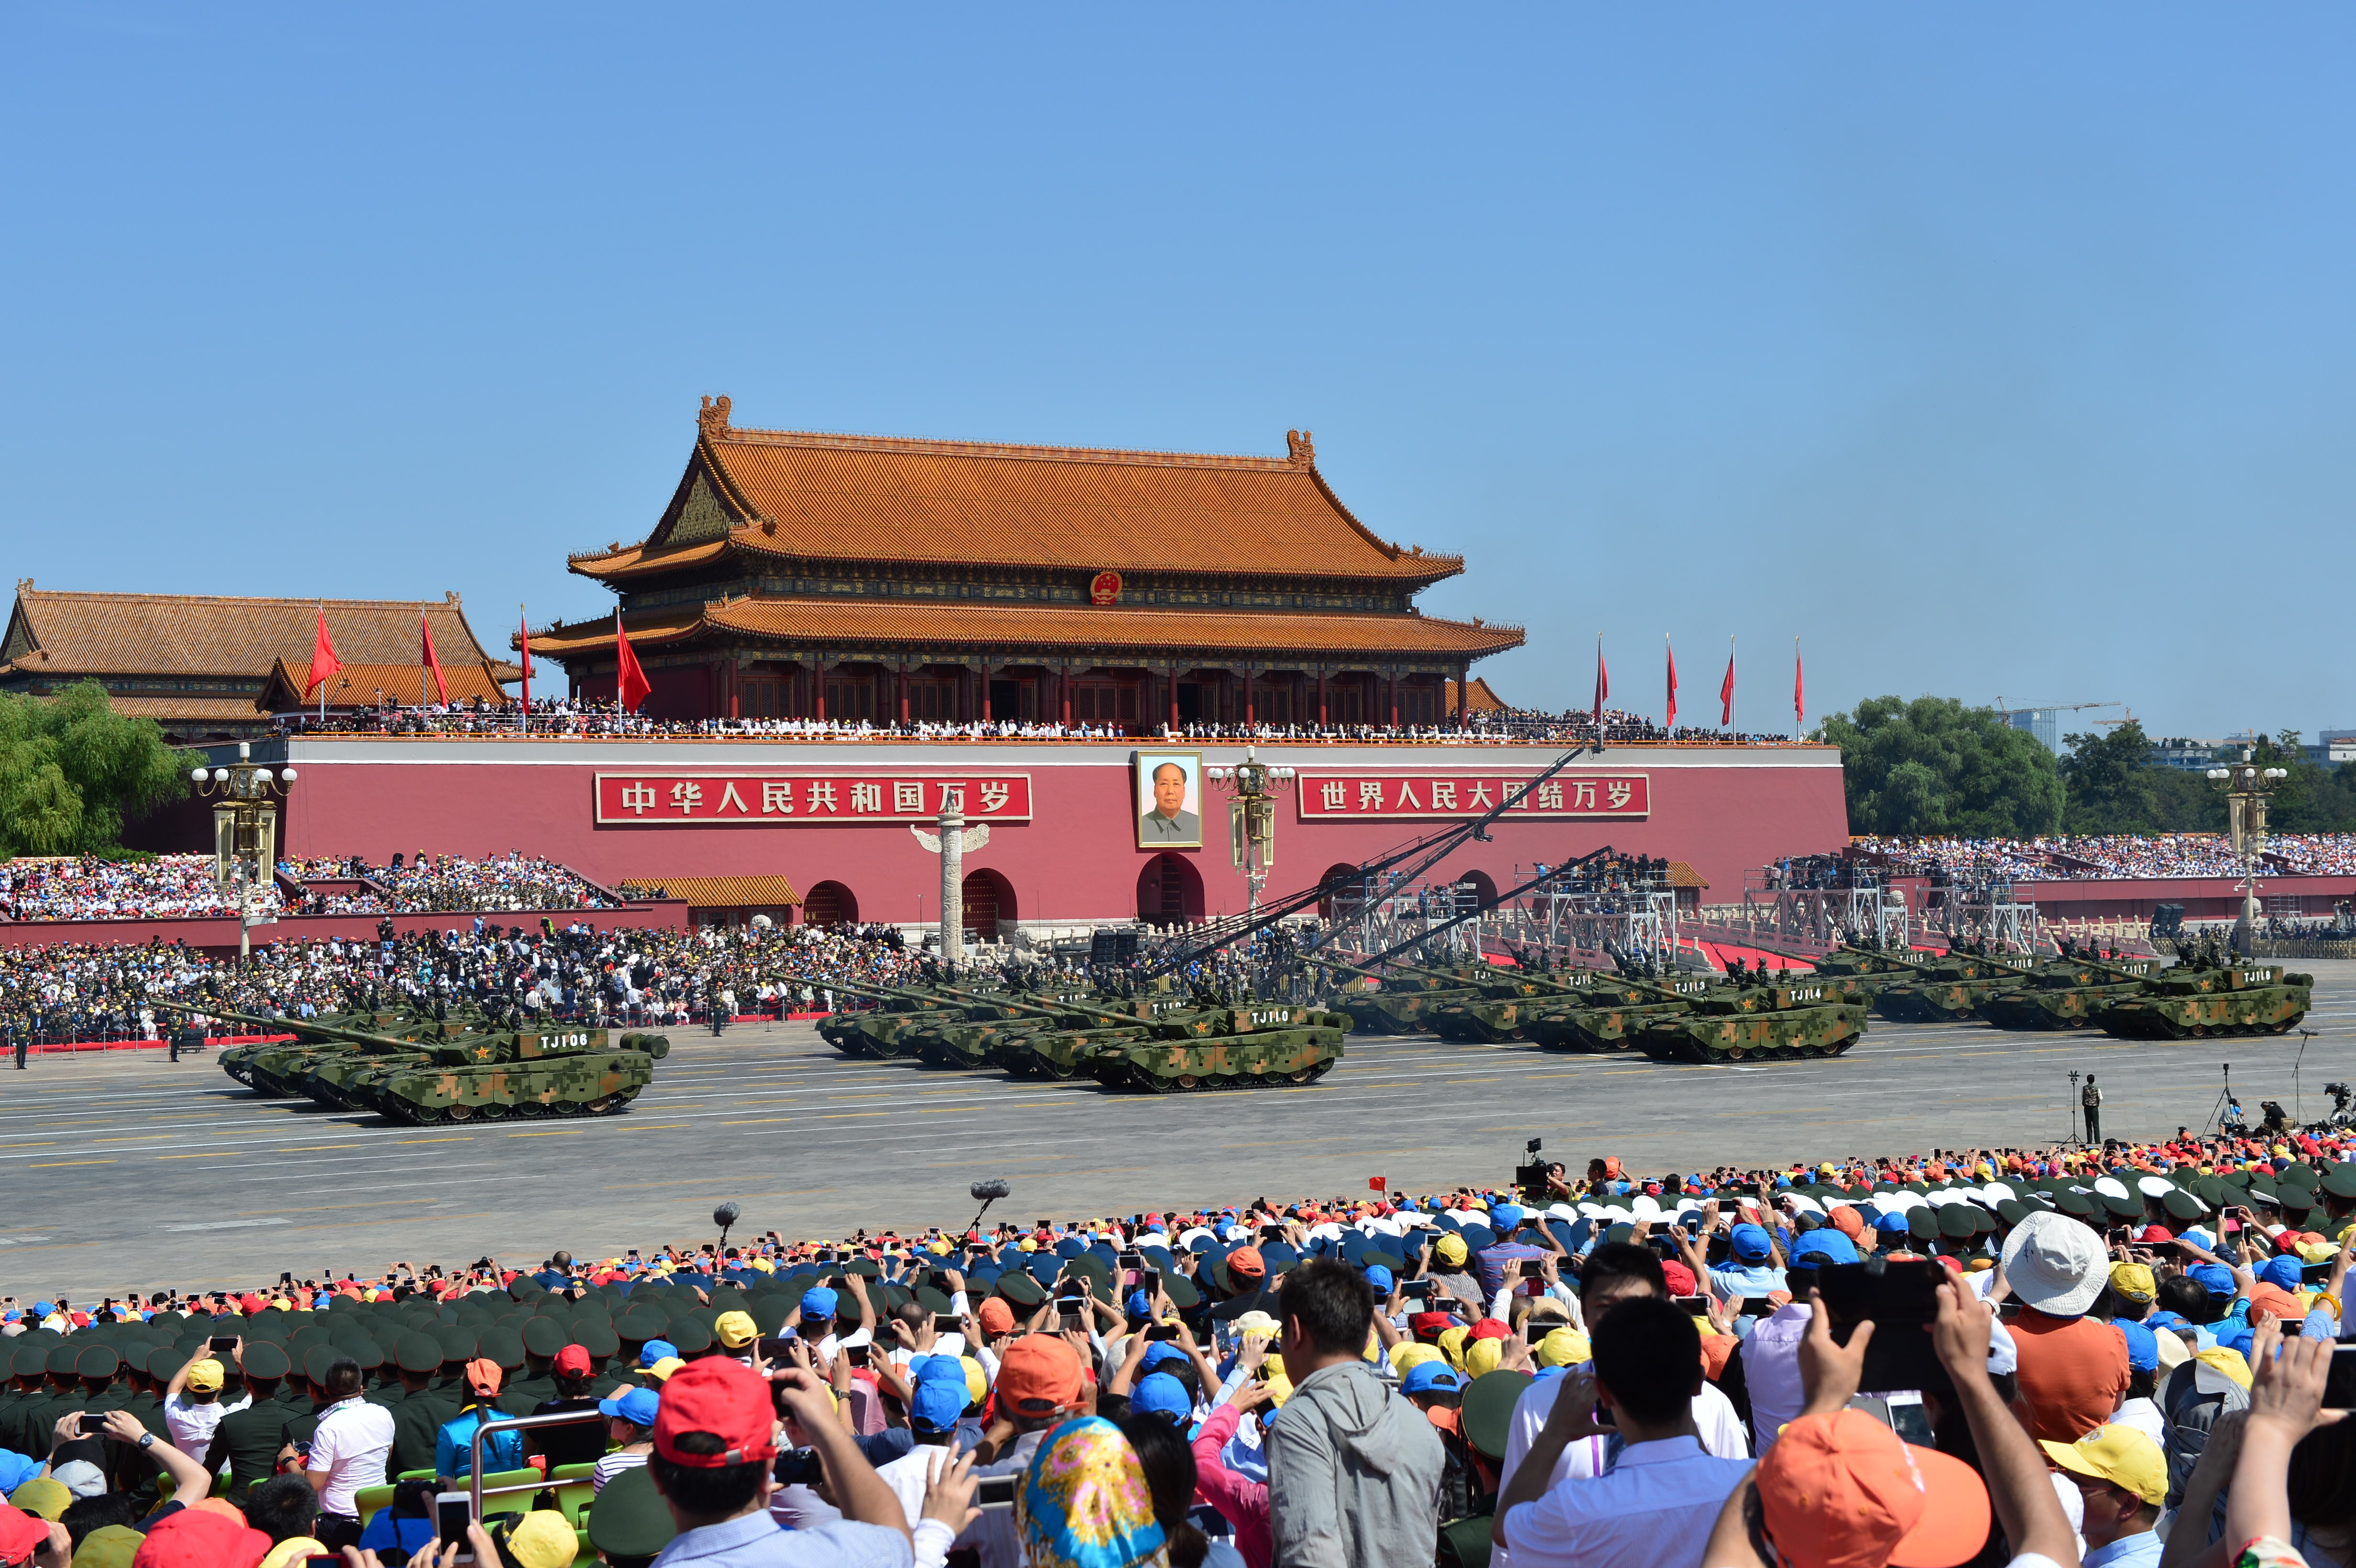 Hopes that VPN blocking would be lifted following a major military parade in Beijing last week have been dashed. Photo: Xinhua